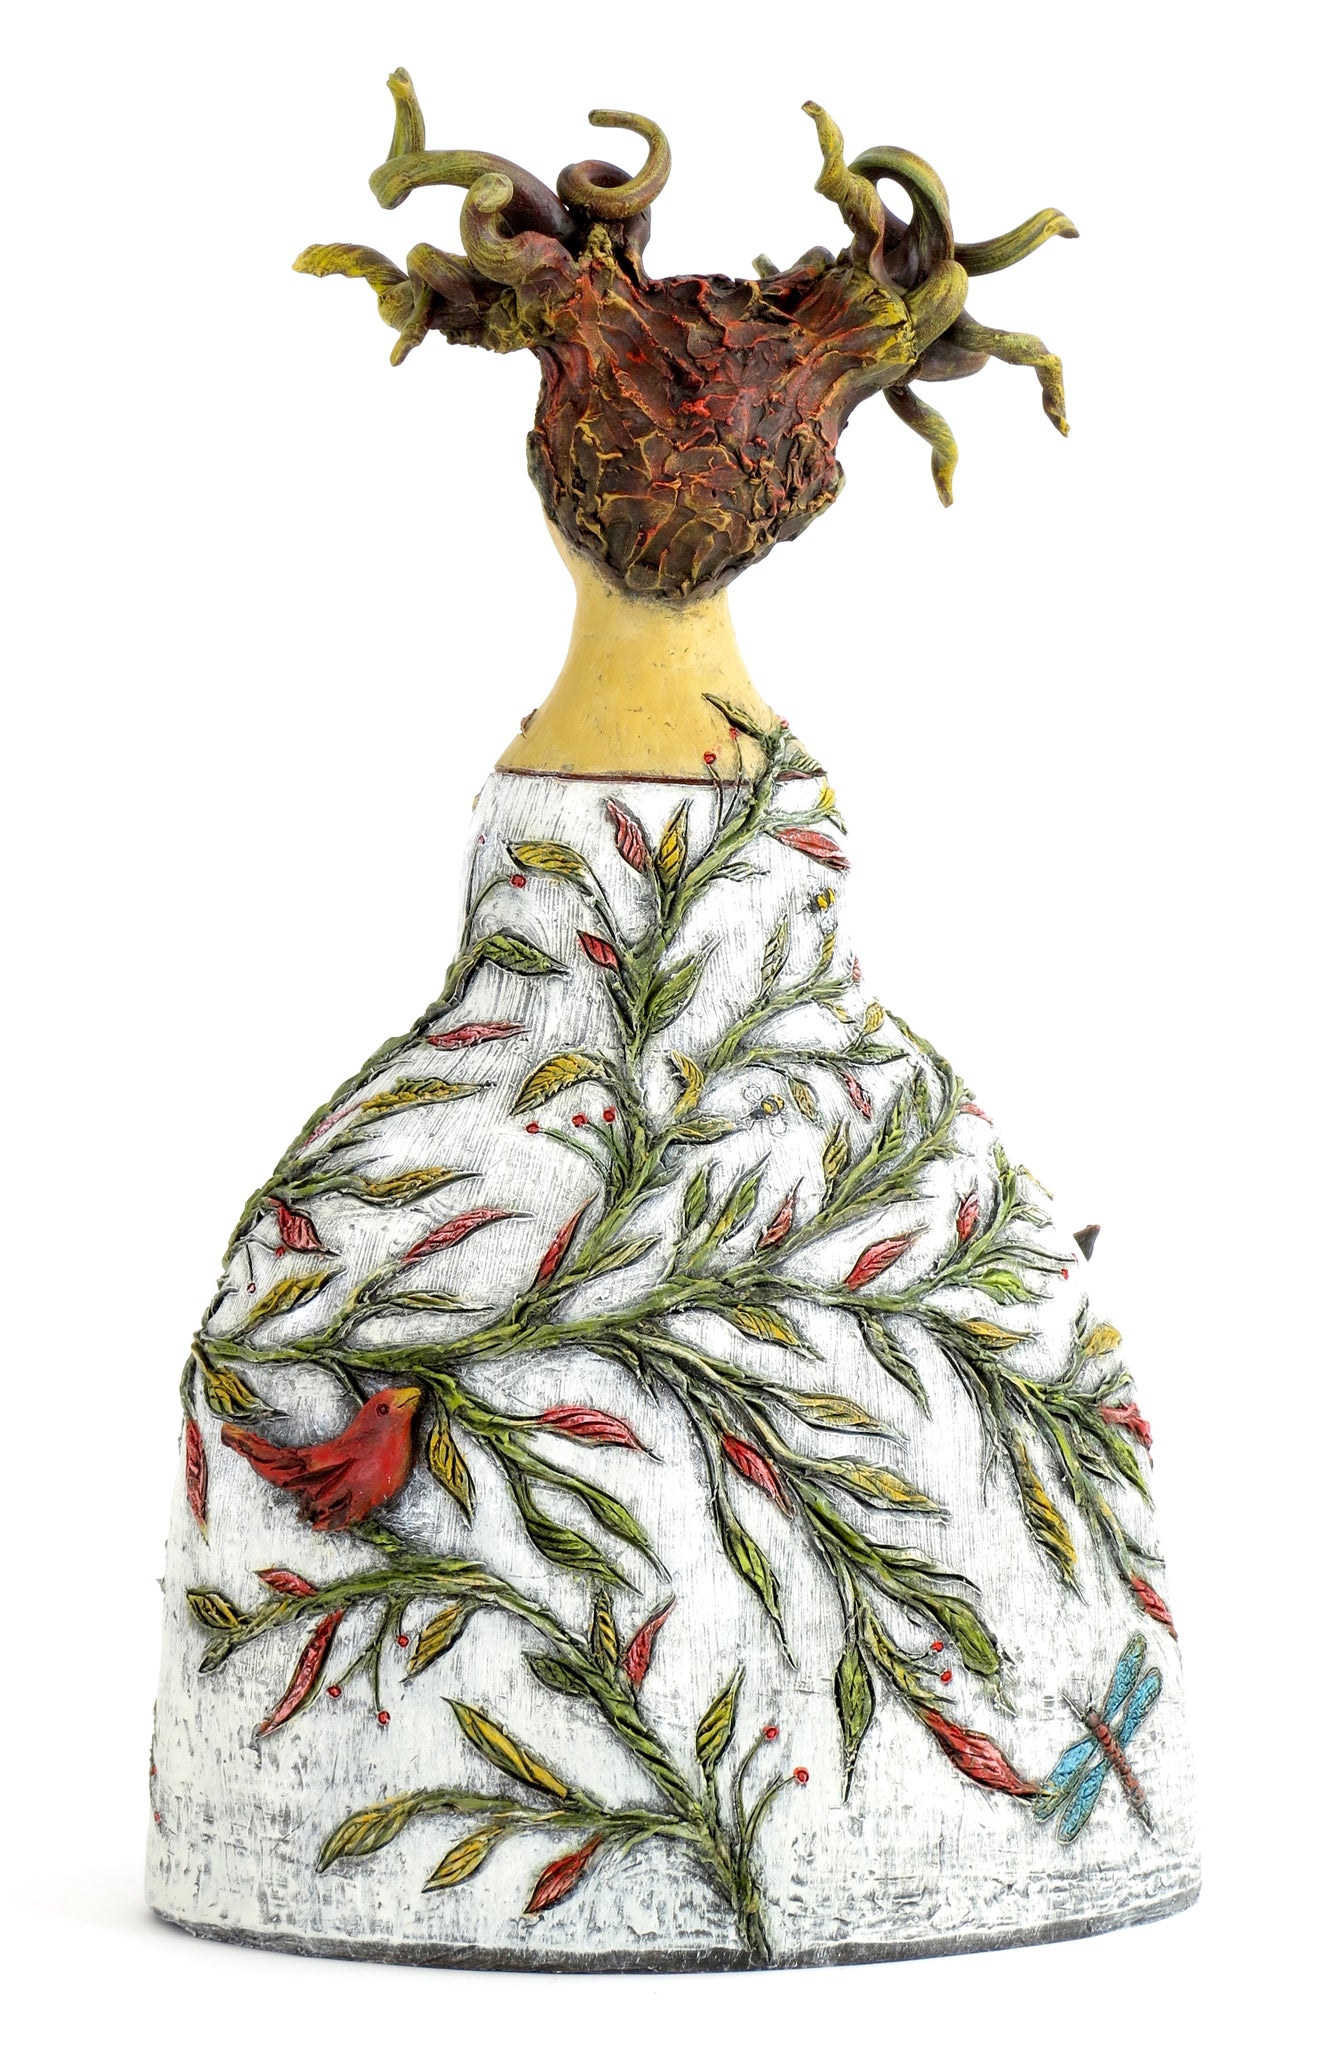 SOLD  "Red Birds Pay Tribute to Her Transformation" Original ceramic sculpture by Jacquline Hurlbert